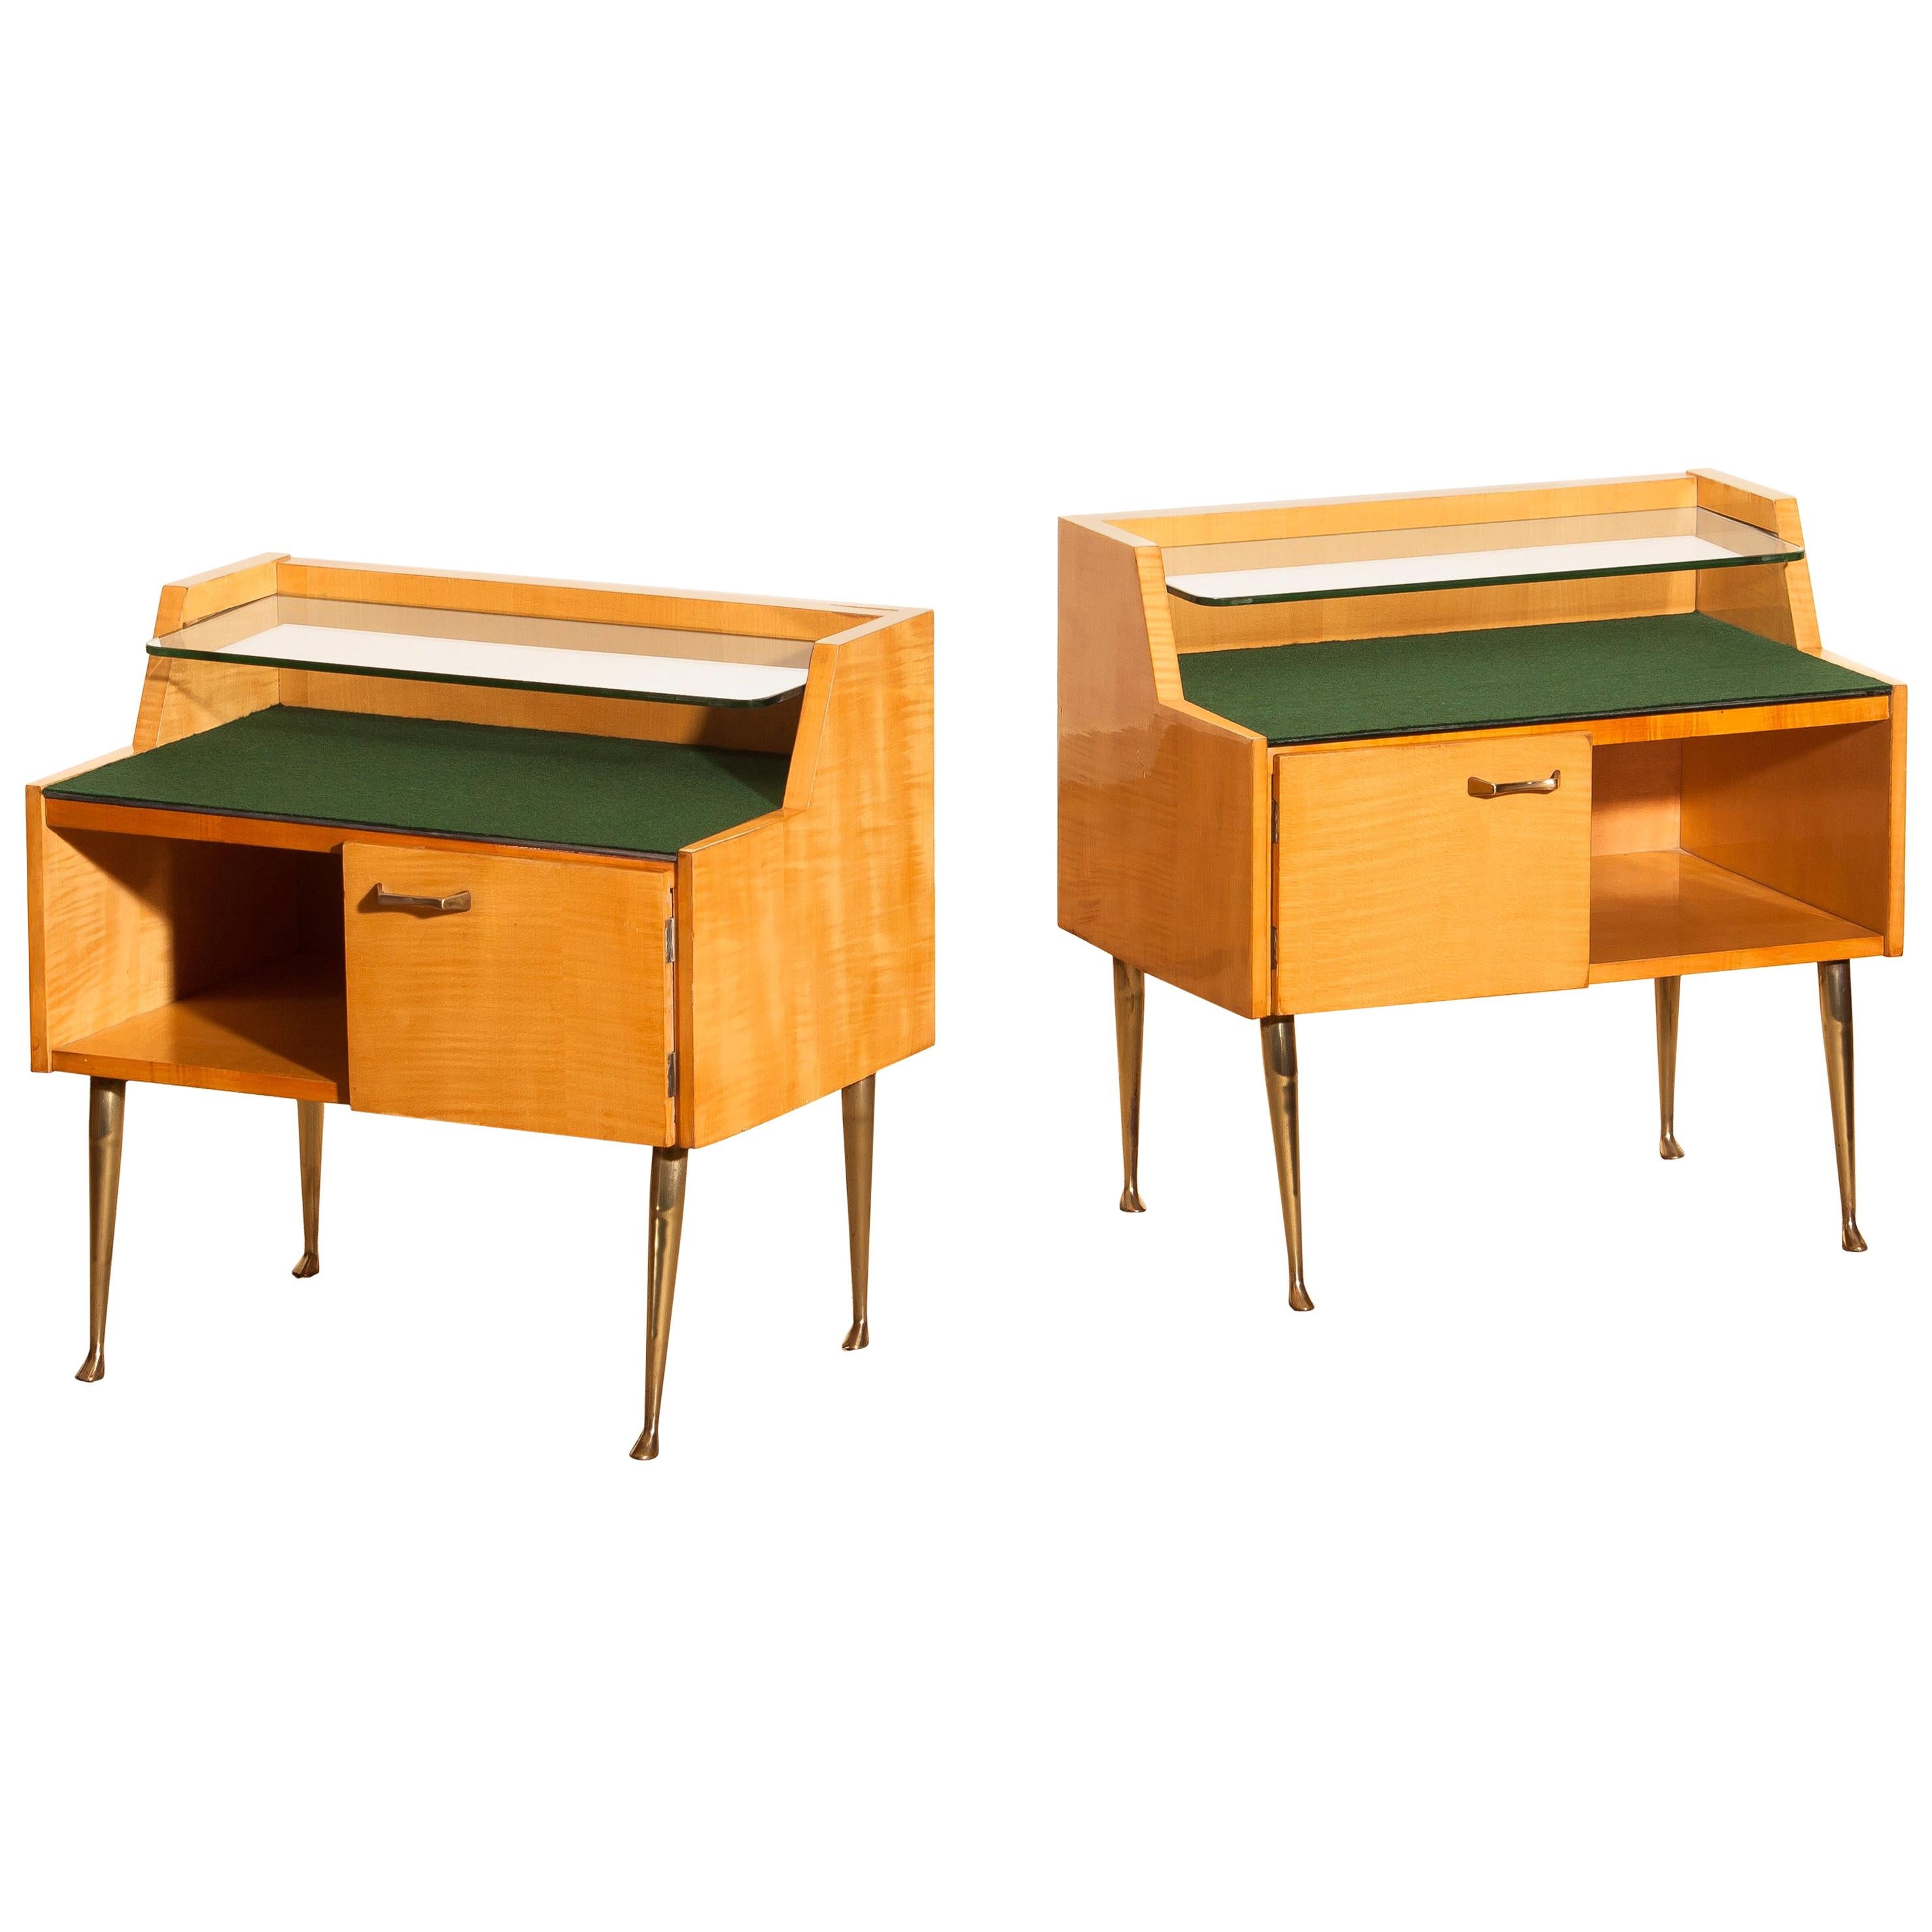 1950s, Pair of Italian Nightstands in Maple with Brass Legs by Paolo Buffa (Moderne der Mitte des Jahrhunderts)